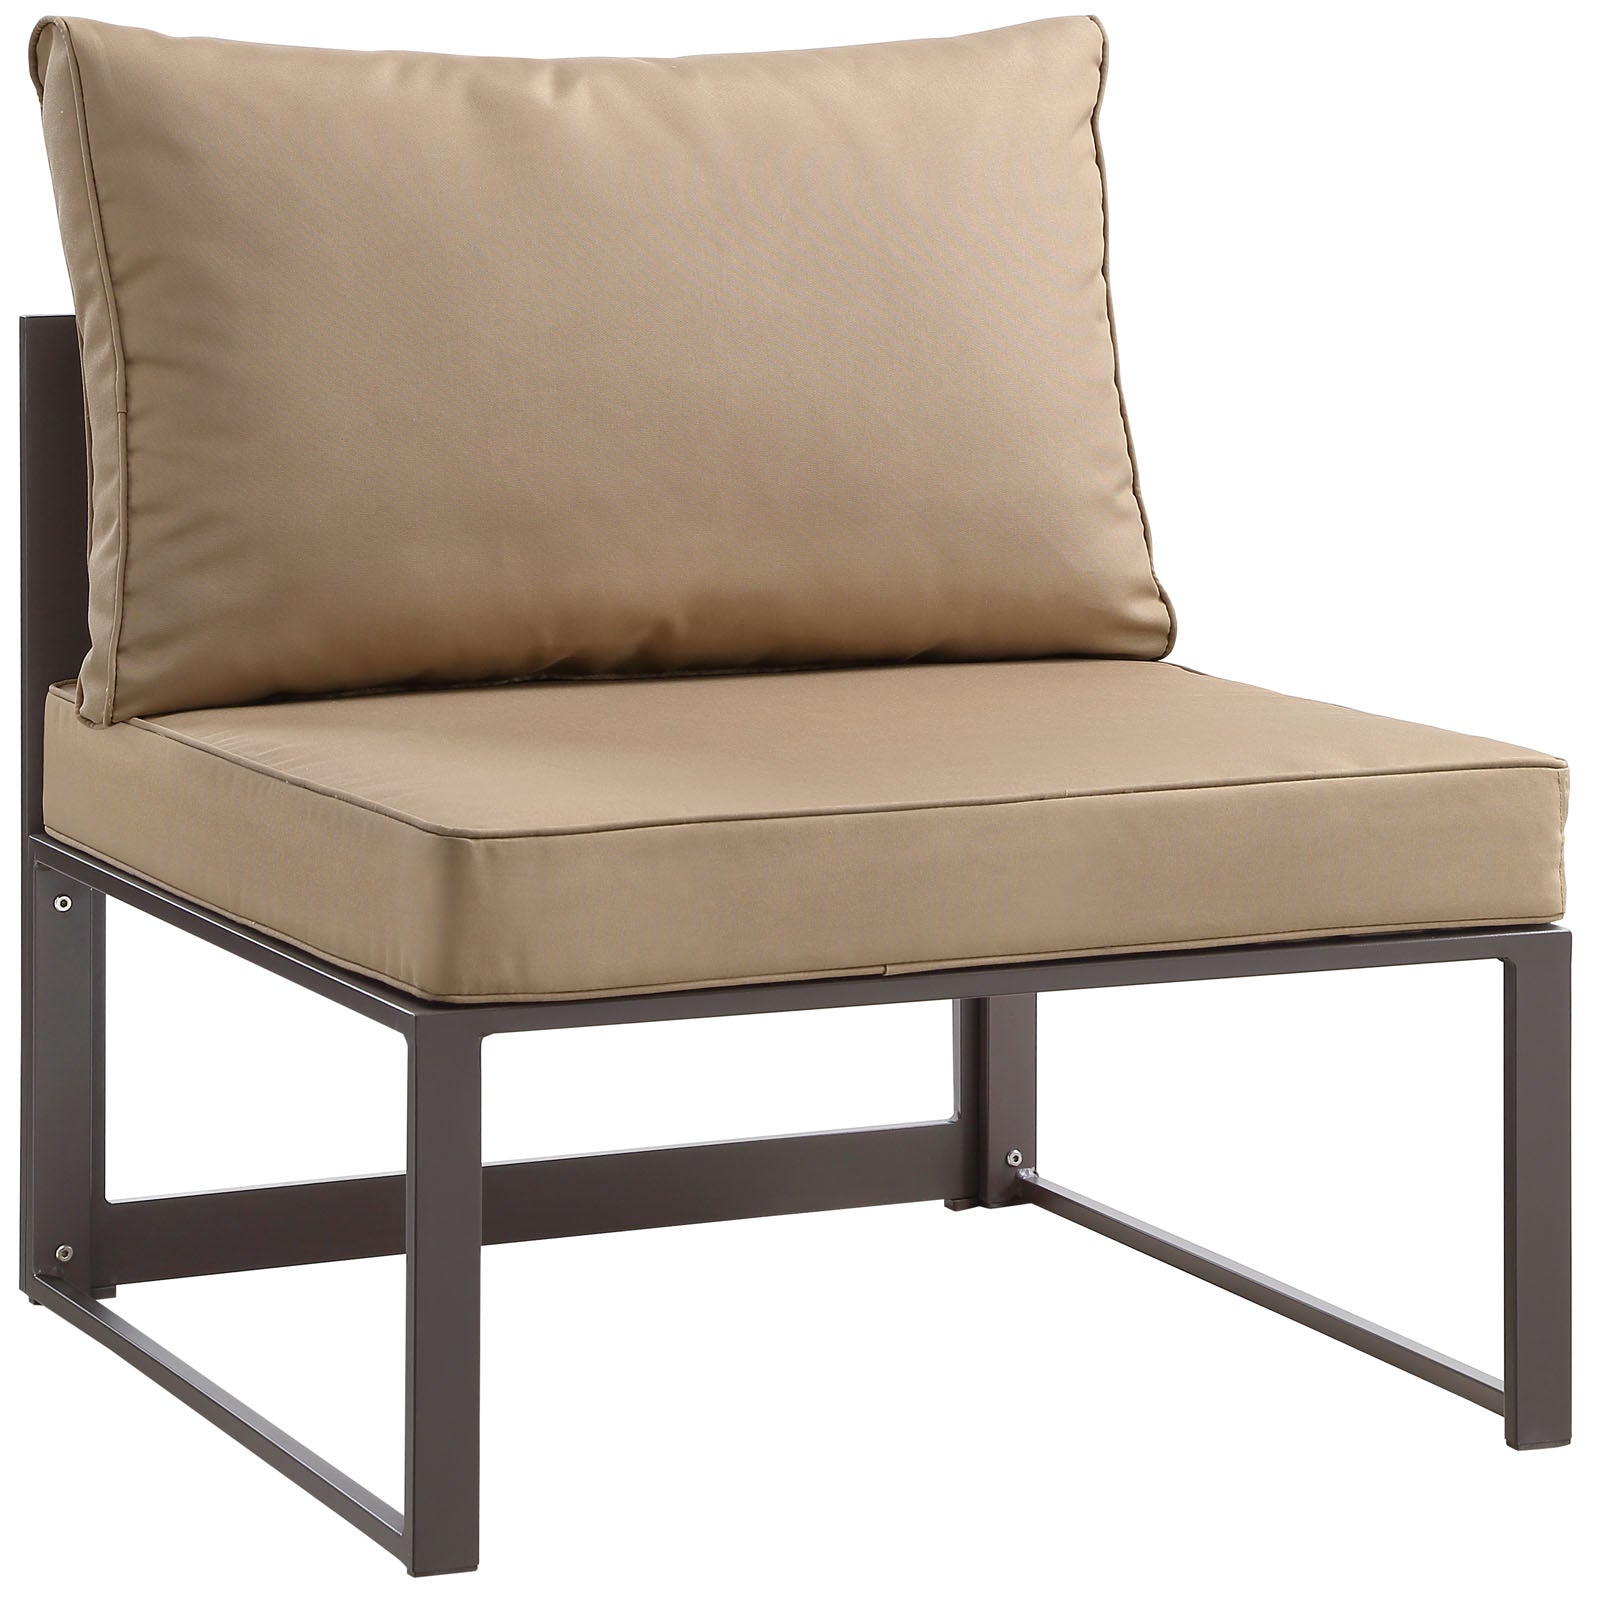 Fortuna Armless Outdoor Patio Chair - East Shore Modern Home Furnishings